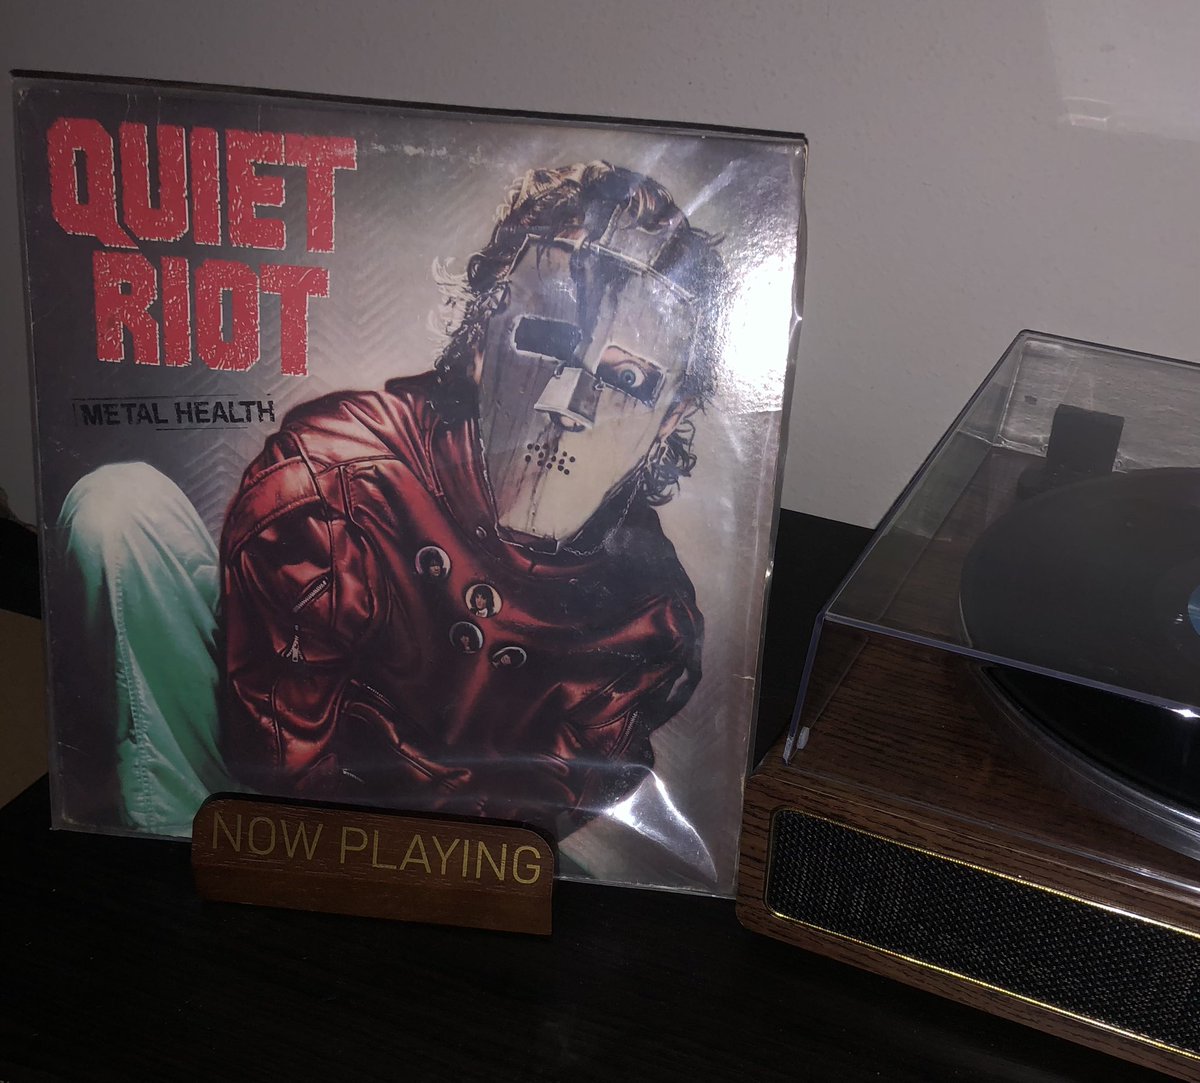 One of the best album covers in my opinion 🤘🏼😆🤘🏼
#QuietRiot
#MetalHealth